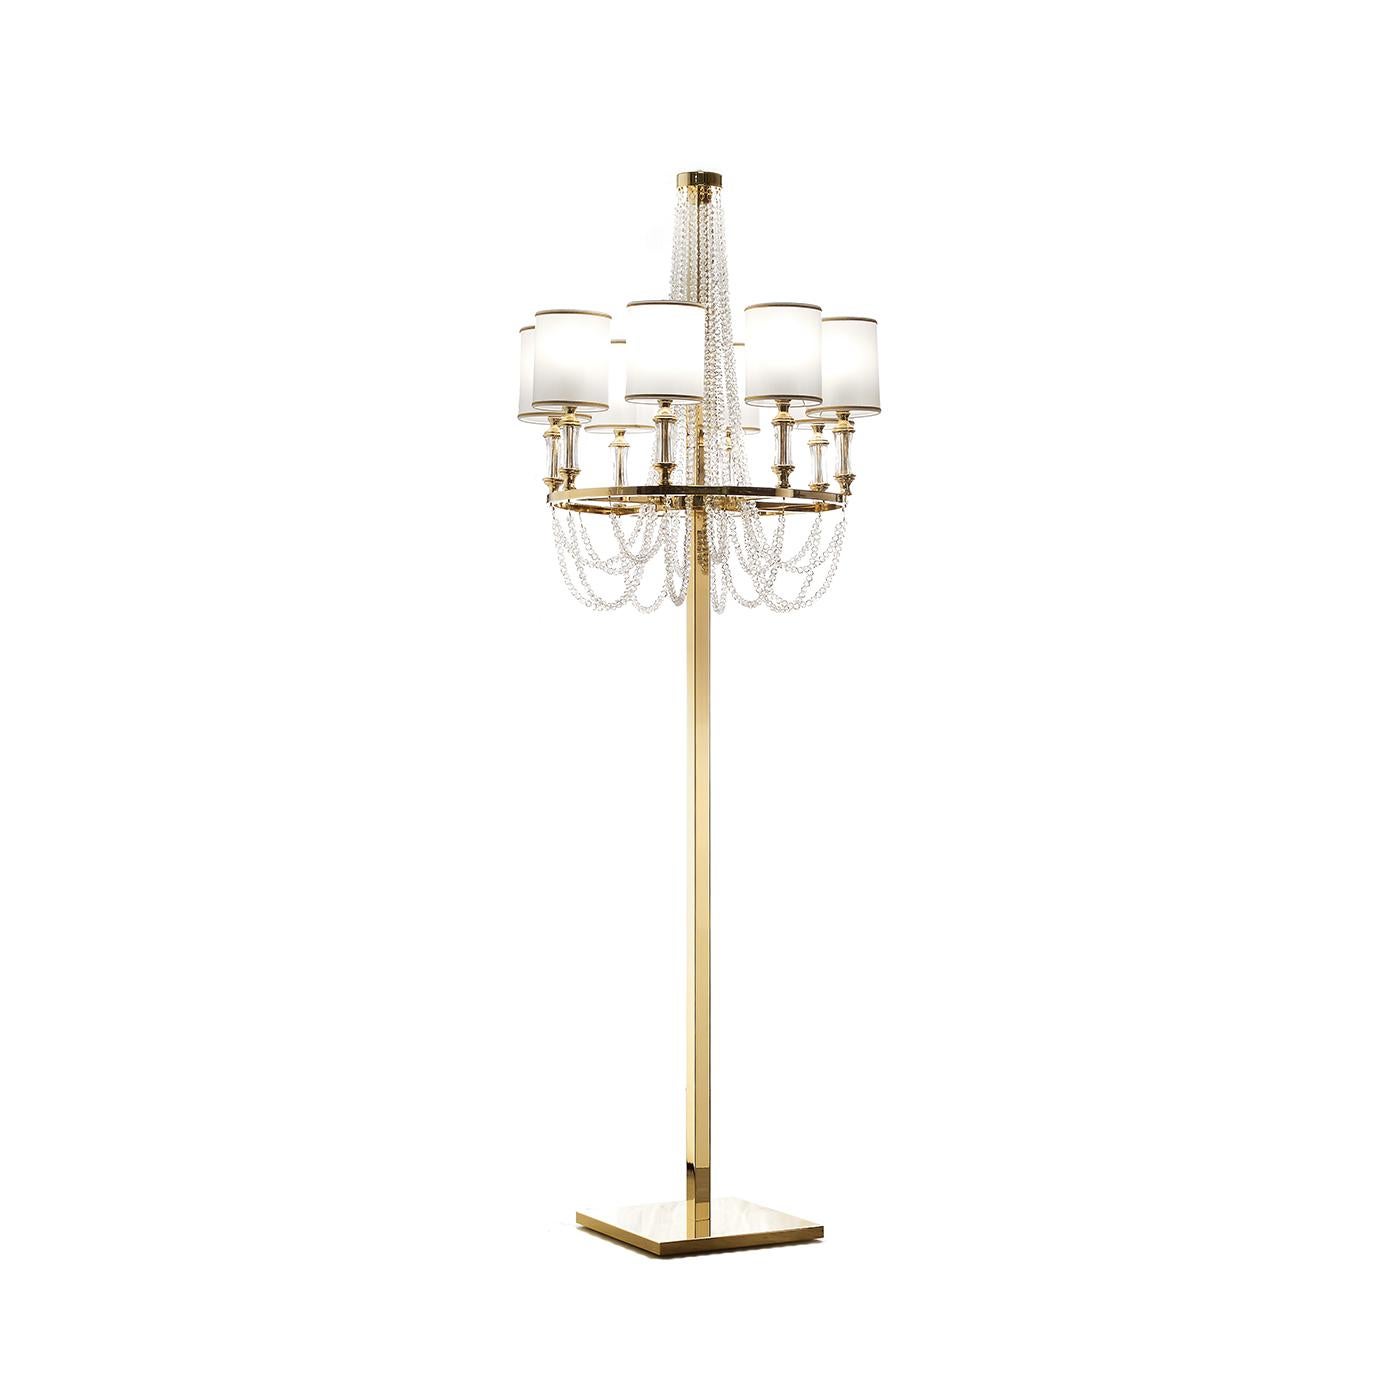 This charming floor lamp combines Art Deco design and a romantic allure for a charming final effect that will make a statement in a classically decorated home. The structure is skillfully handmade in metal with a polished brass finish. The ring at